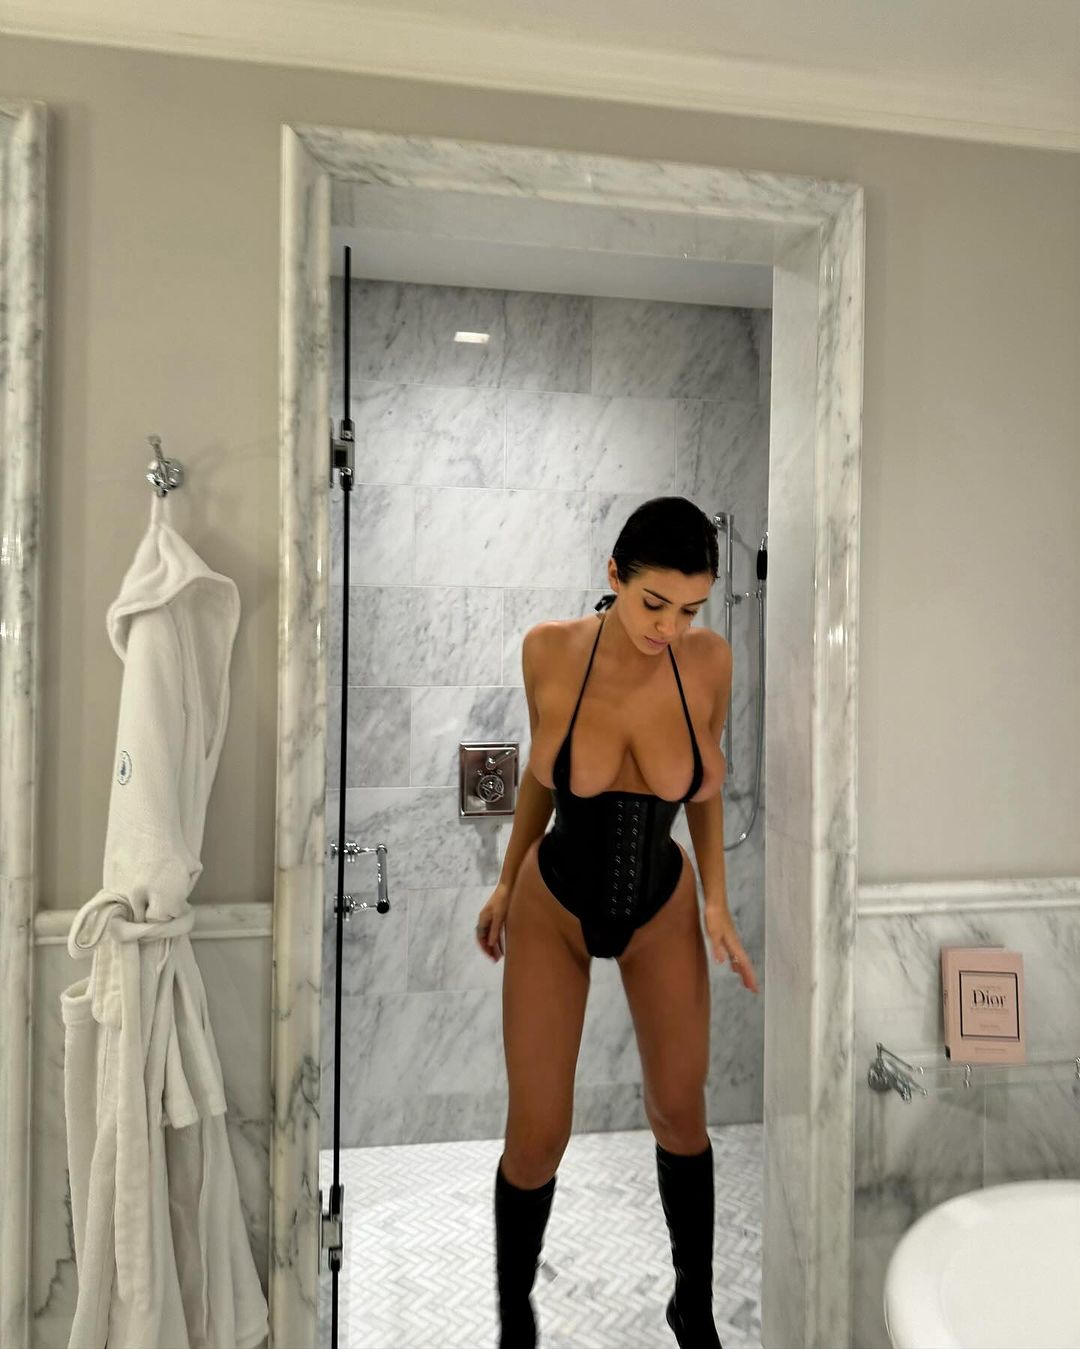 Photos n°2 : Ye Declares “No Pants This Year” As He Shares Revealing Snaps of His Wife Bianca!